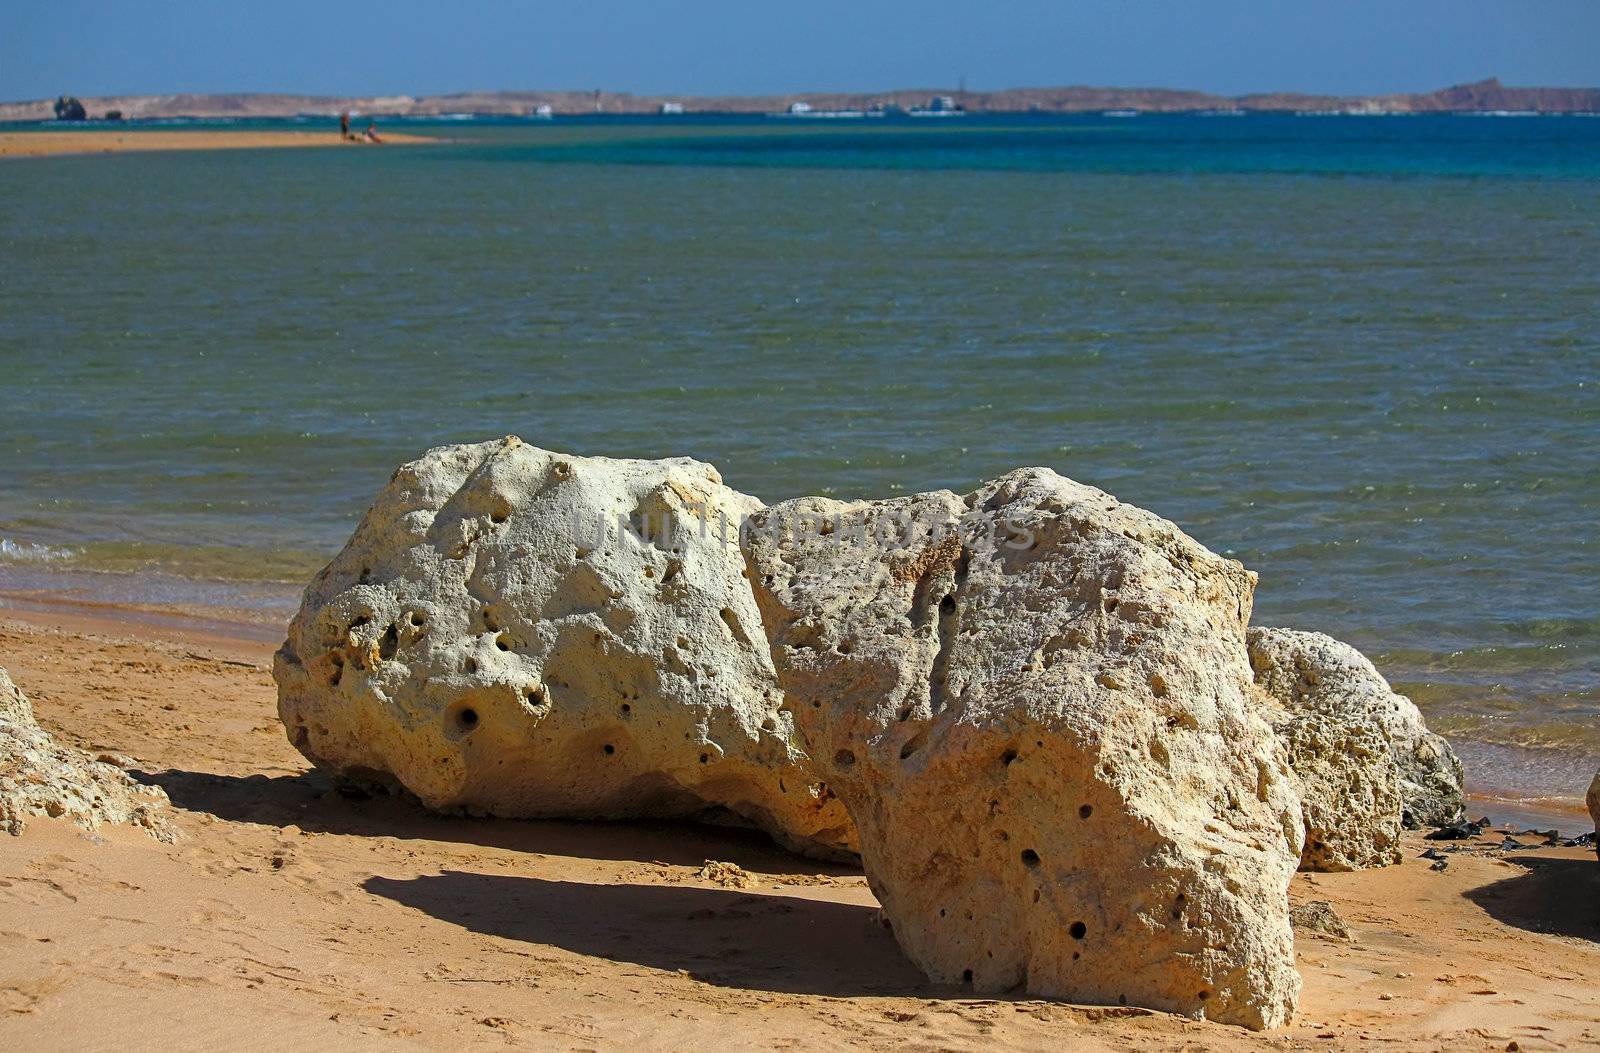 View of the large rocks on the Red Sea, Egypt.